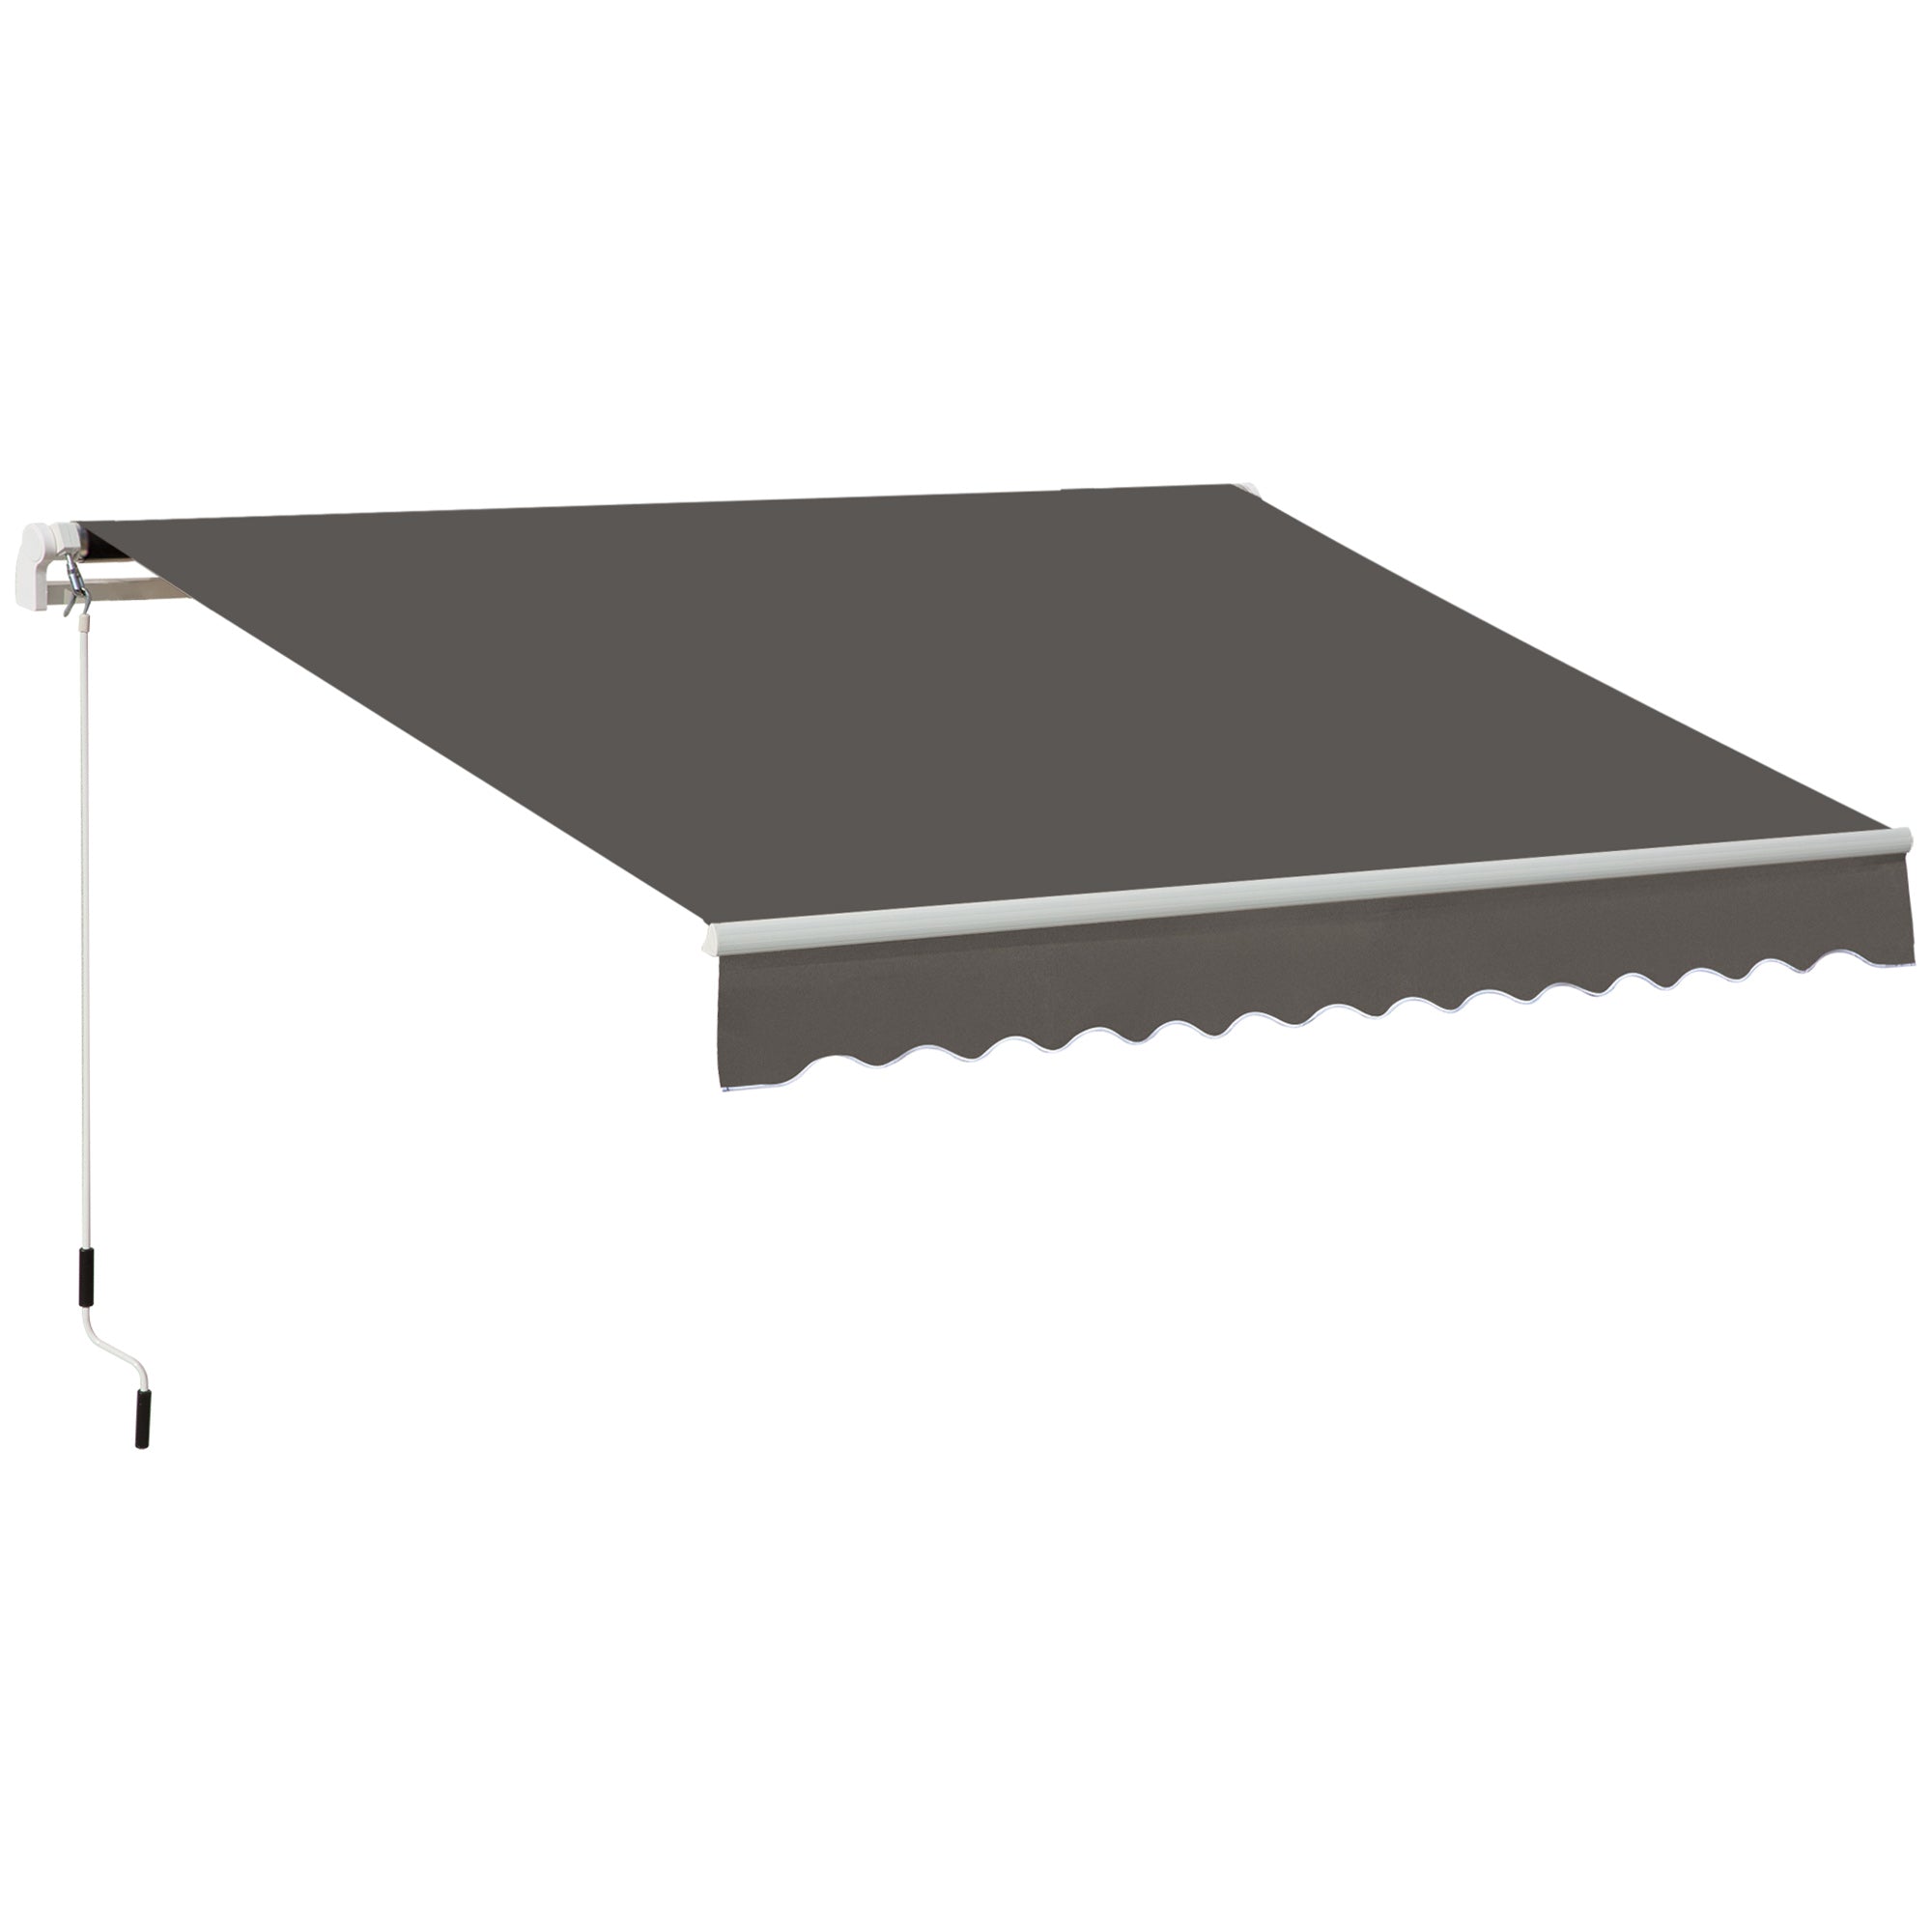 Outsunny Manual Retractable Awning Garden Shelter Canopy 3 x 2m Grey  | TJ Hughes